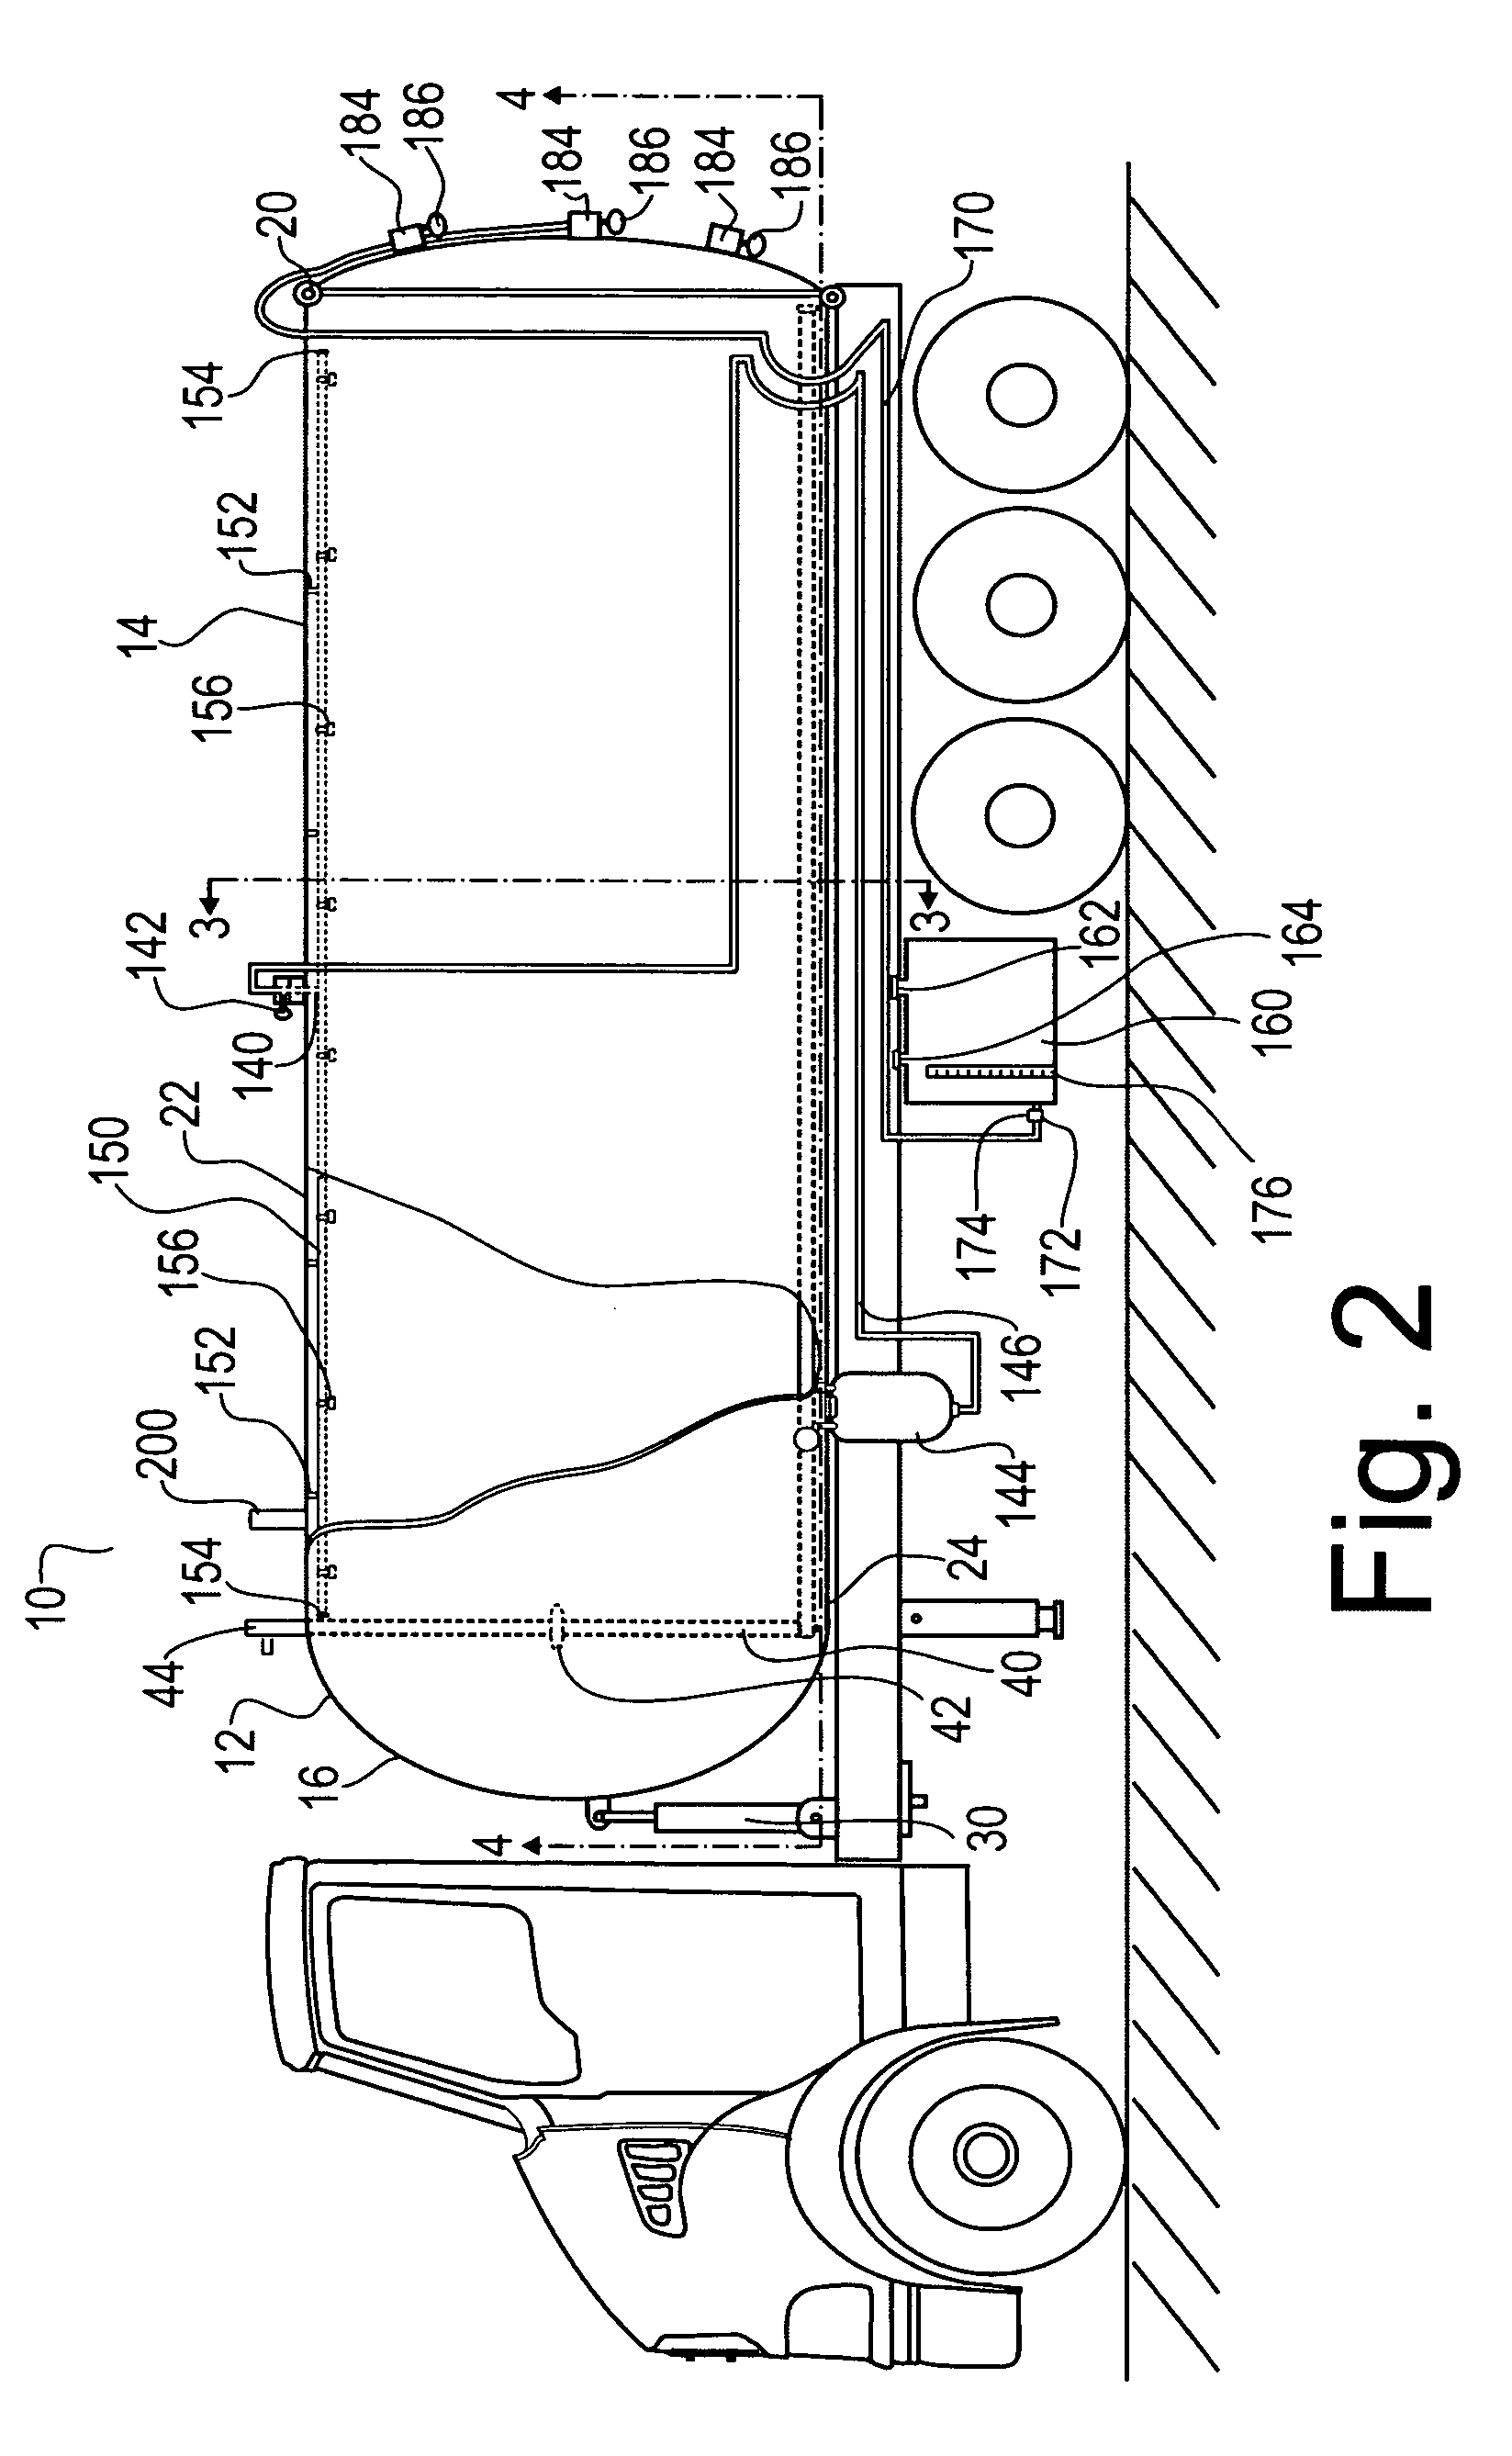 Process and apparatus for enhanced recovery of oil from oily particulate material